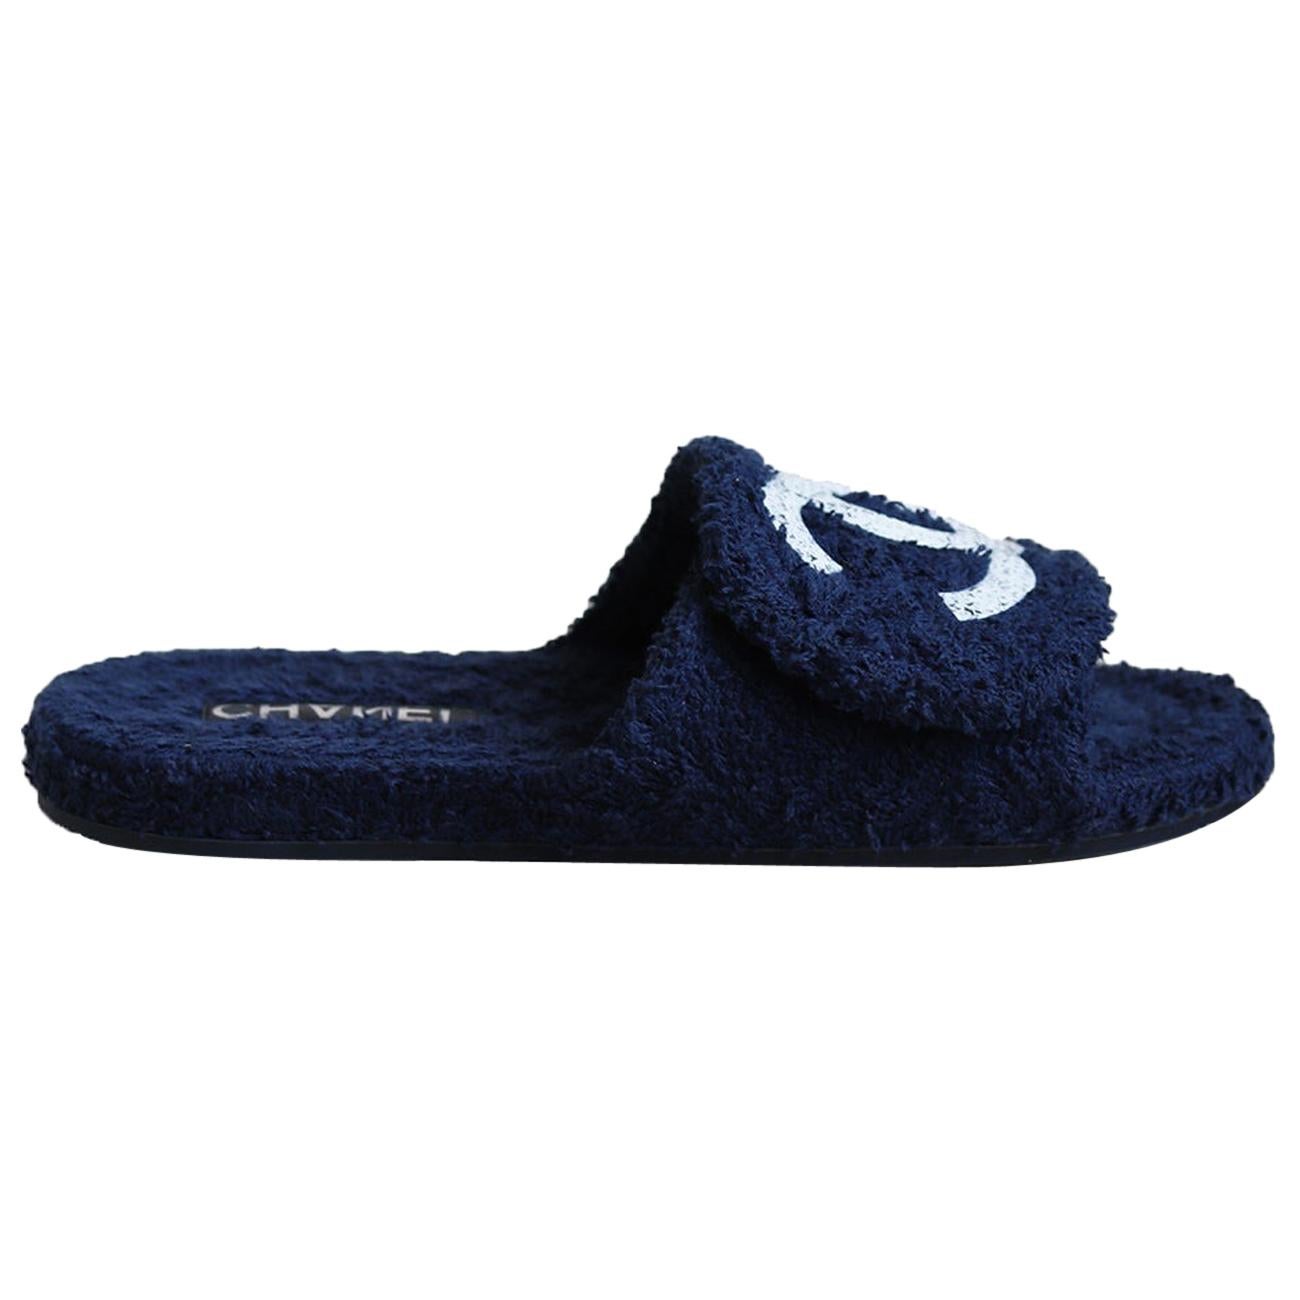 A perfect choice for day or lounging around in the evening, these sandals have been crafted in Italy from navy cotton terry-cloth and rubber soles that beautifully frame the feet. 
Printed tweed plastic logo design along front.
Heel measures